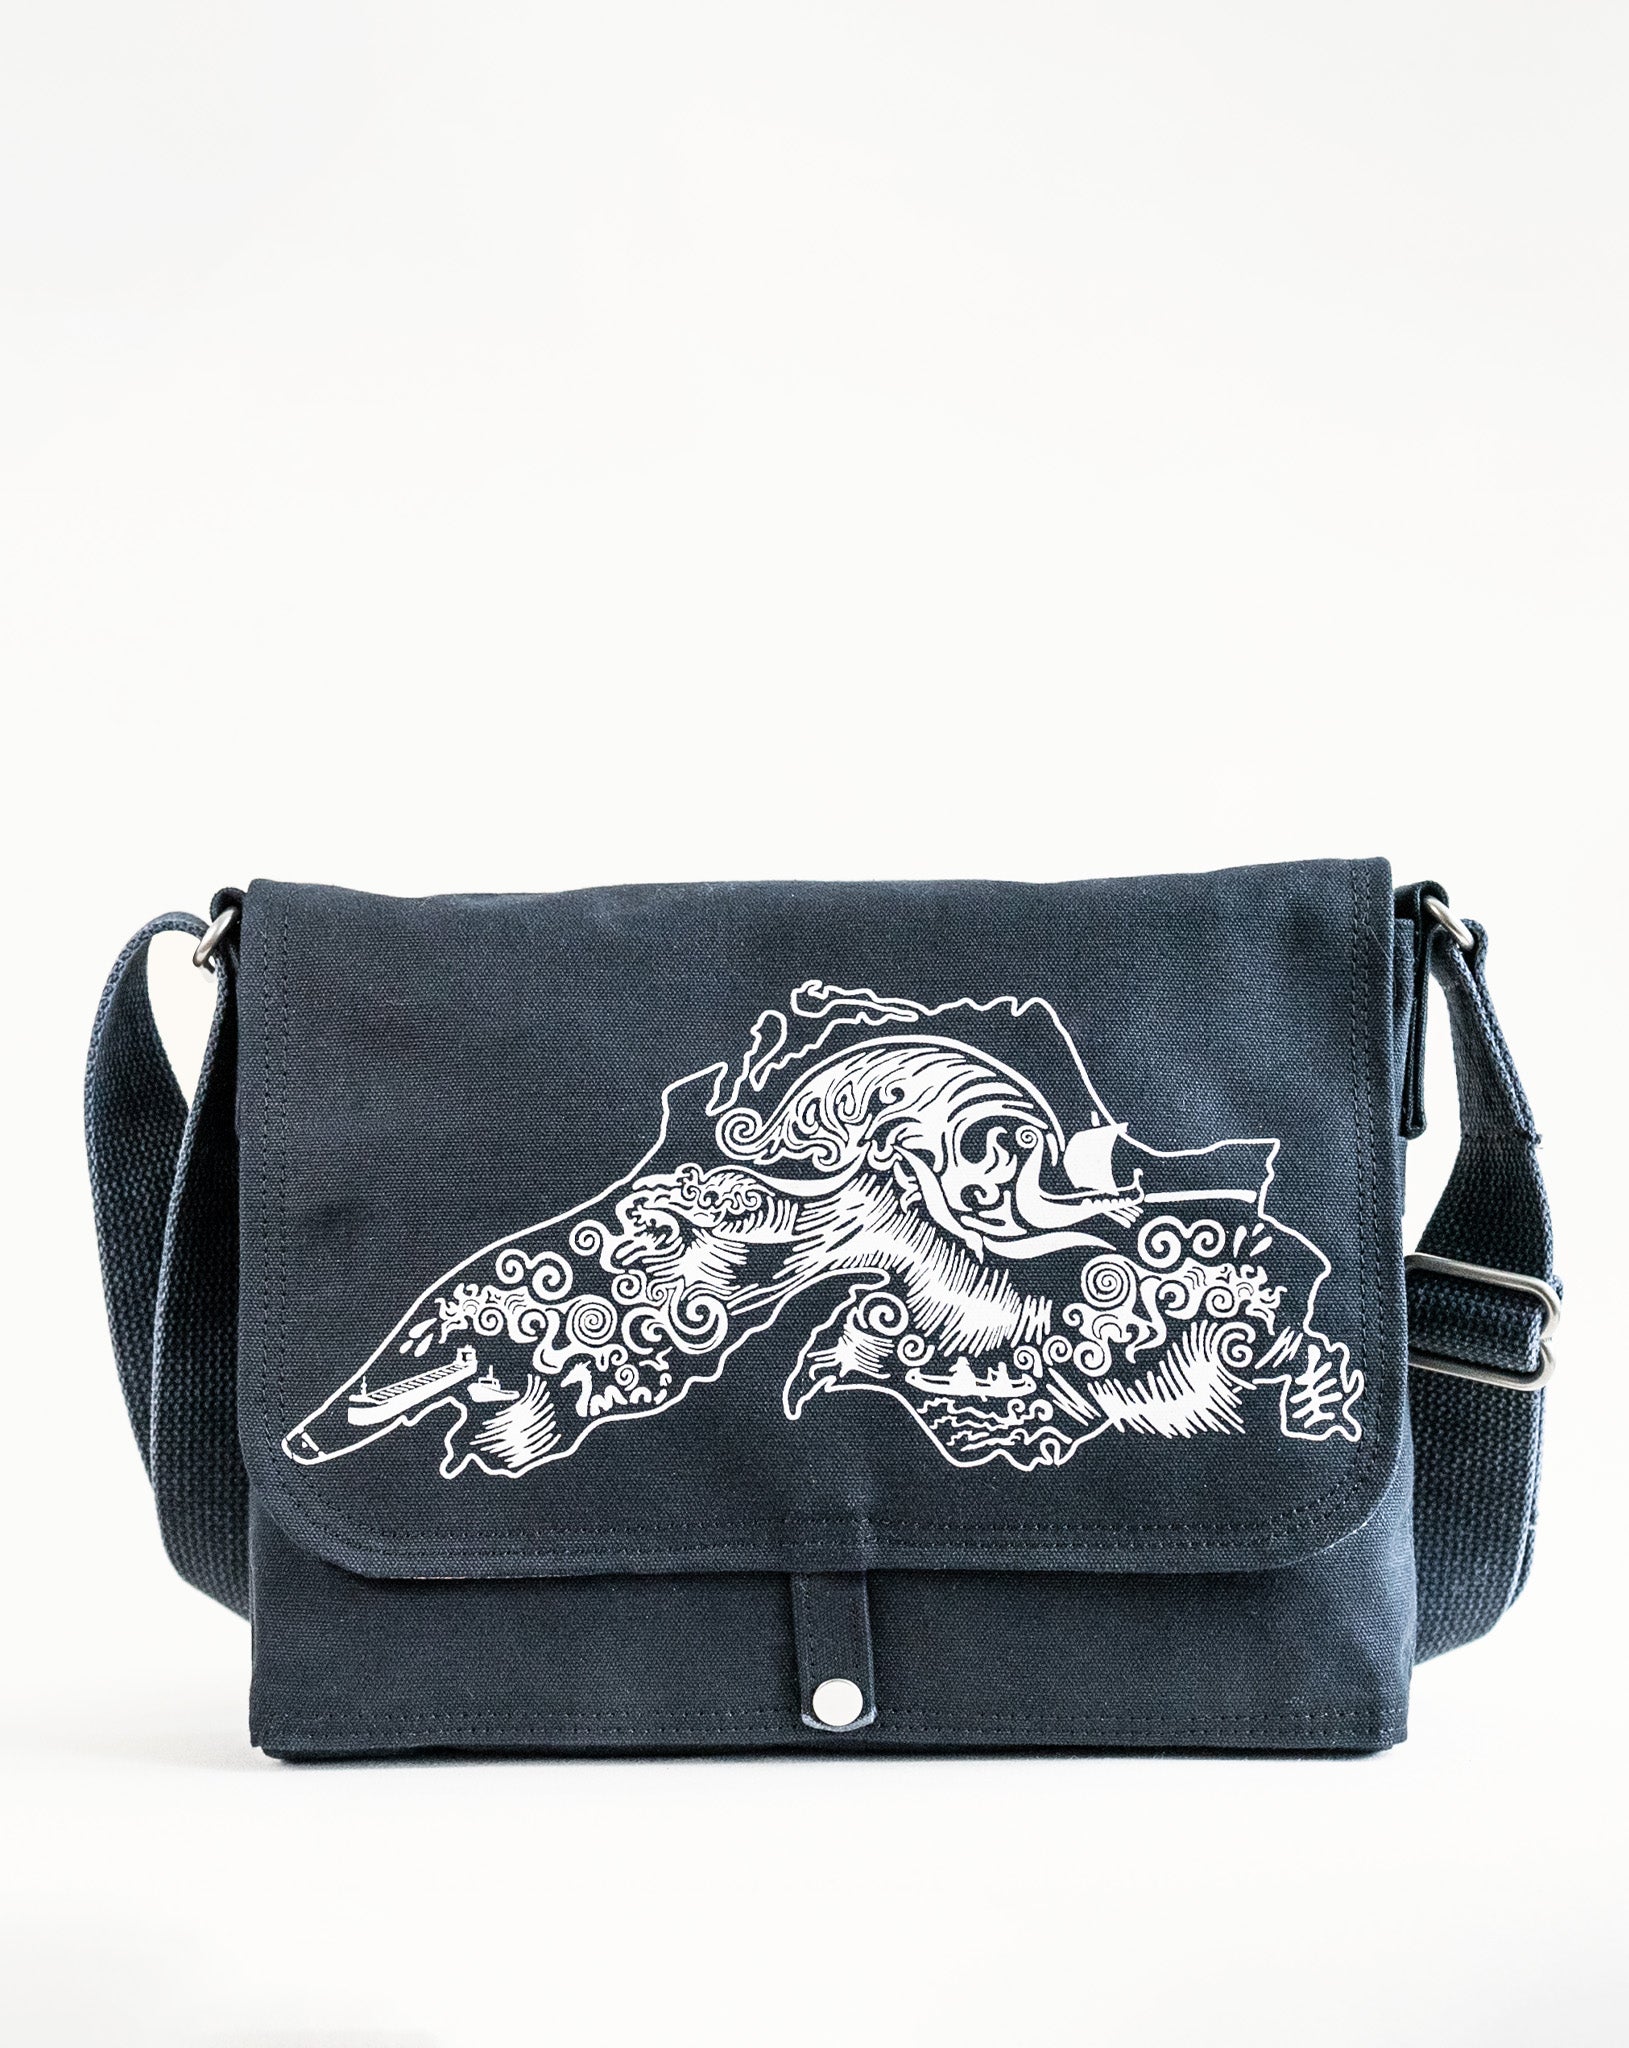 Front exterior of Dock 5’s Lake Superior Canvas Messenger Bag in black featuring art from owner Natalija Walbridge